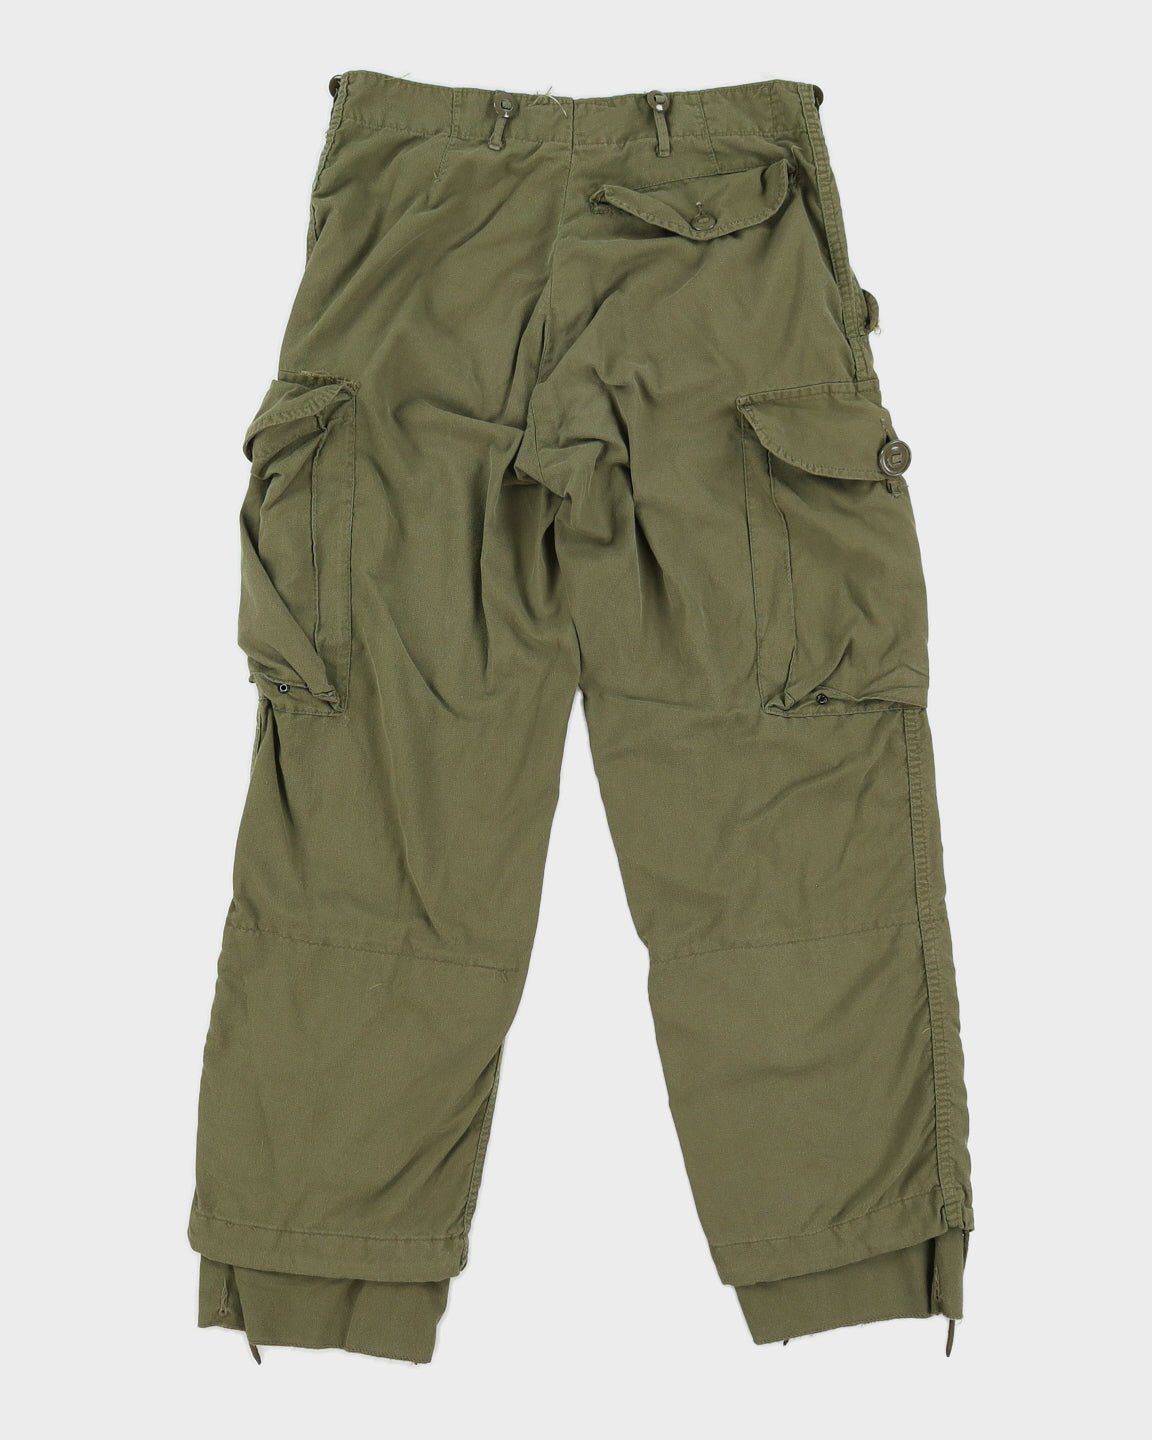 80s Canadian Army Lightweight Combat Trousers - 30x26